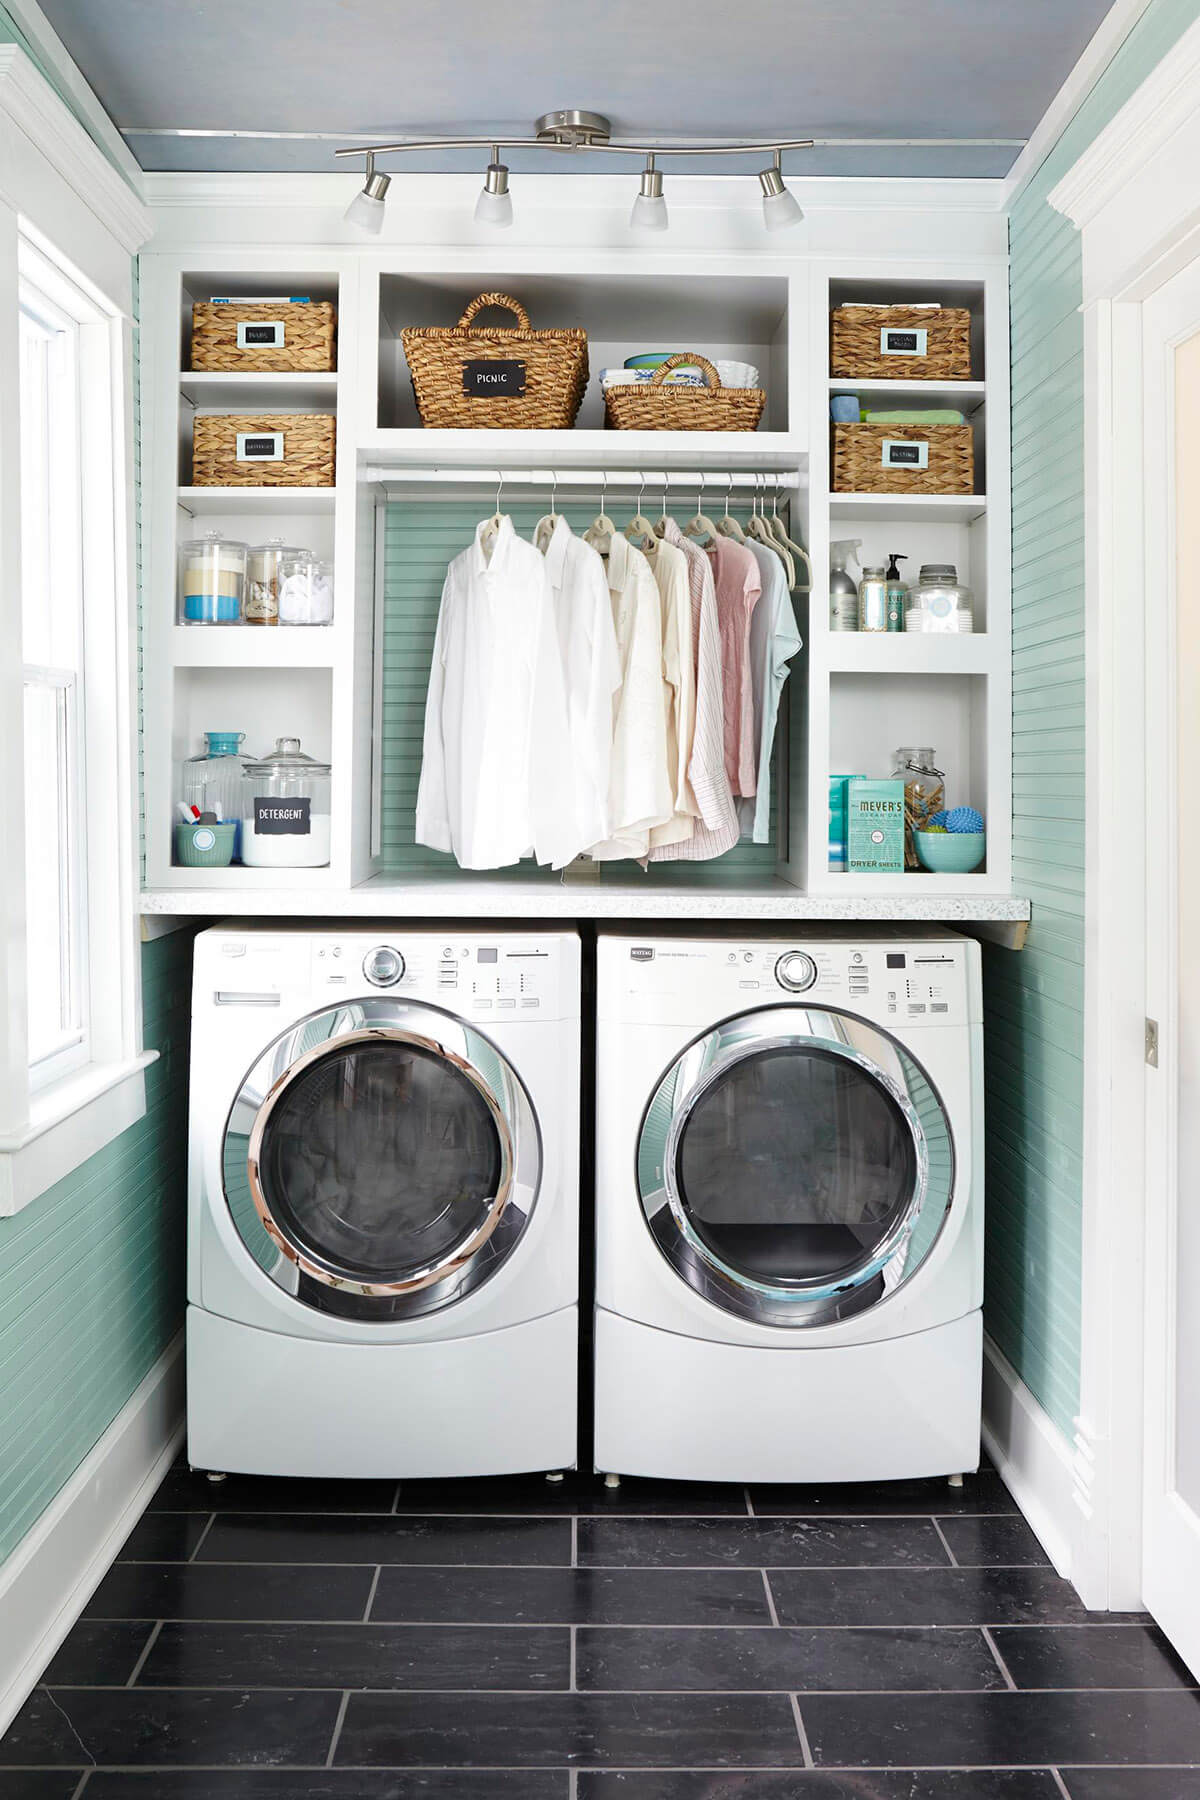 Custom Shelves and Hanging Space Maximize this Laundry Nook